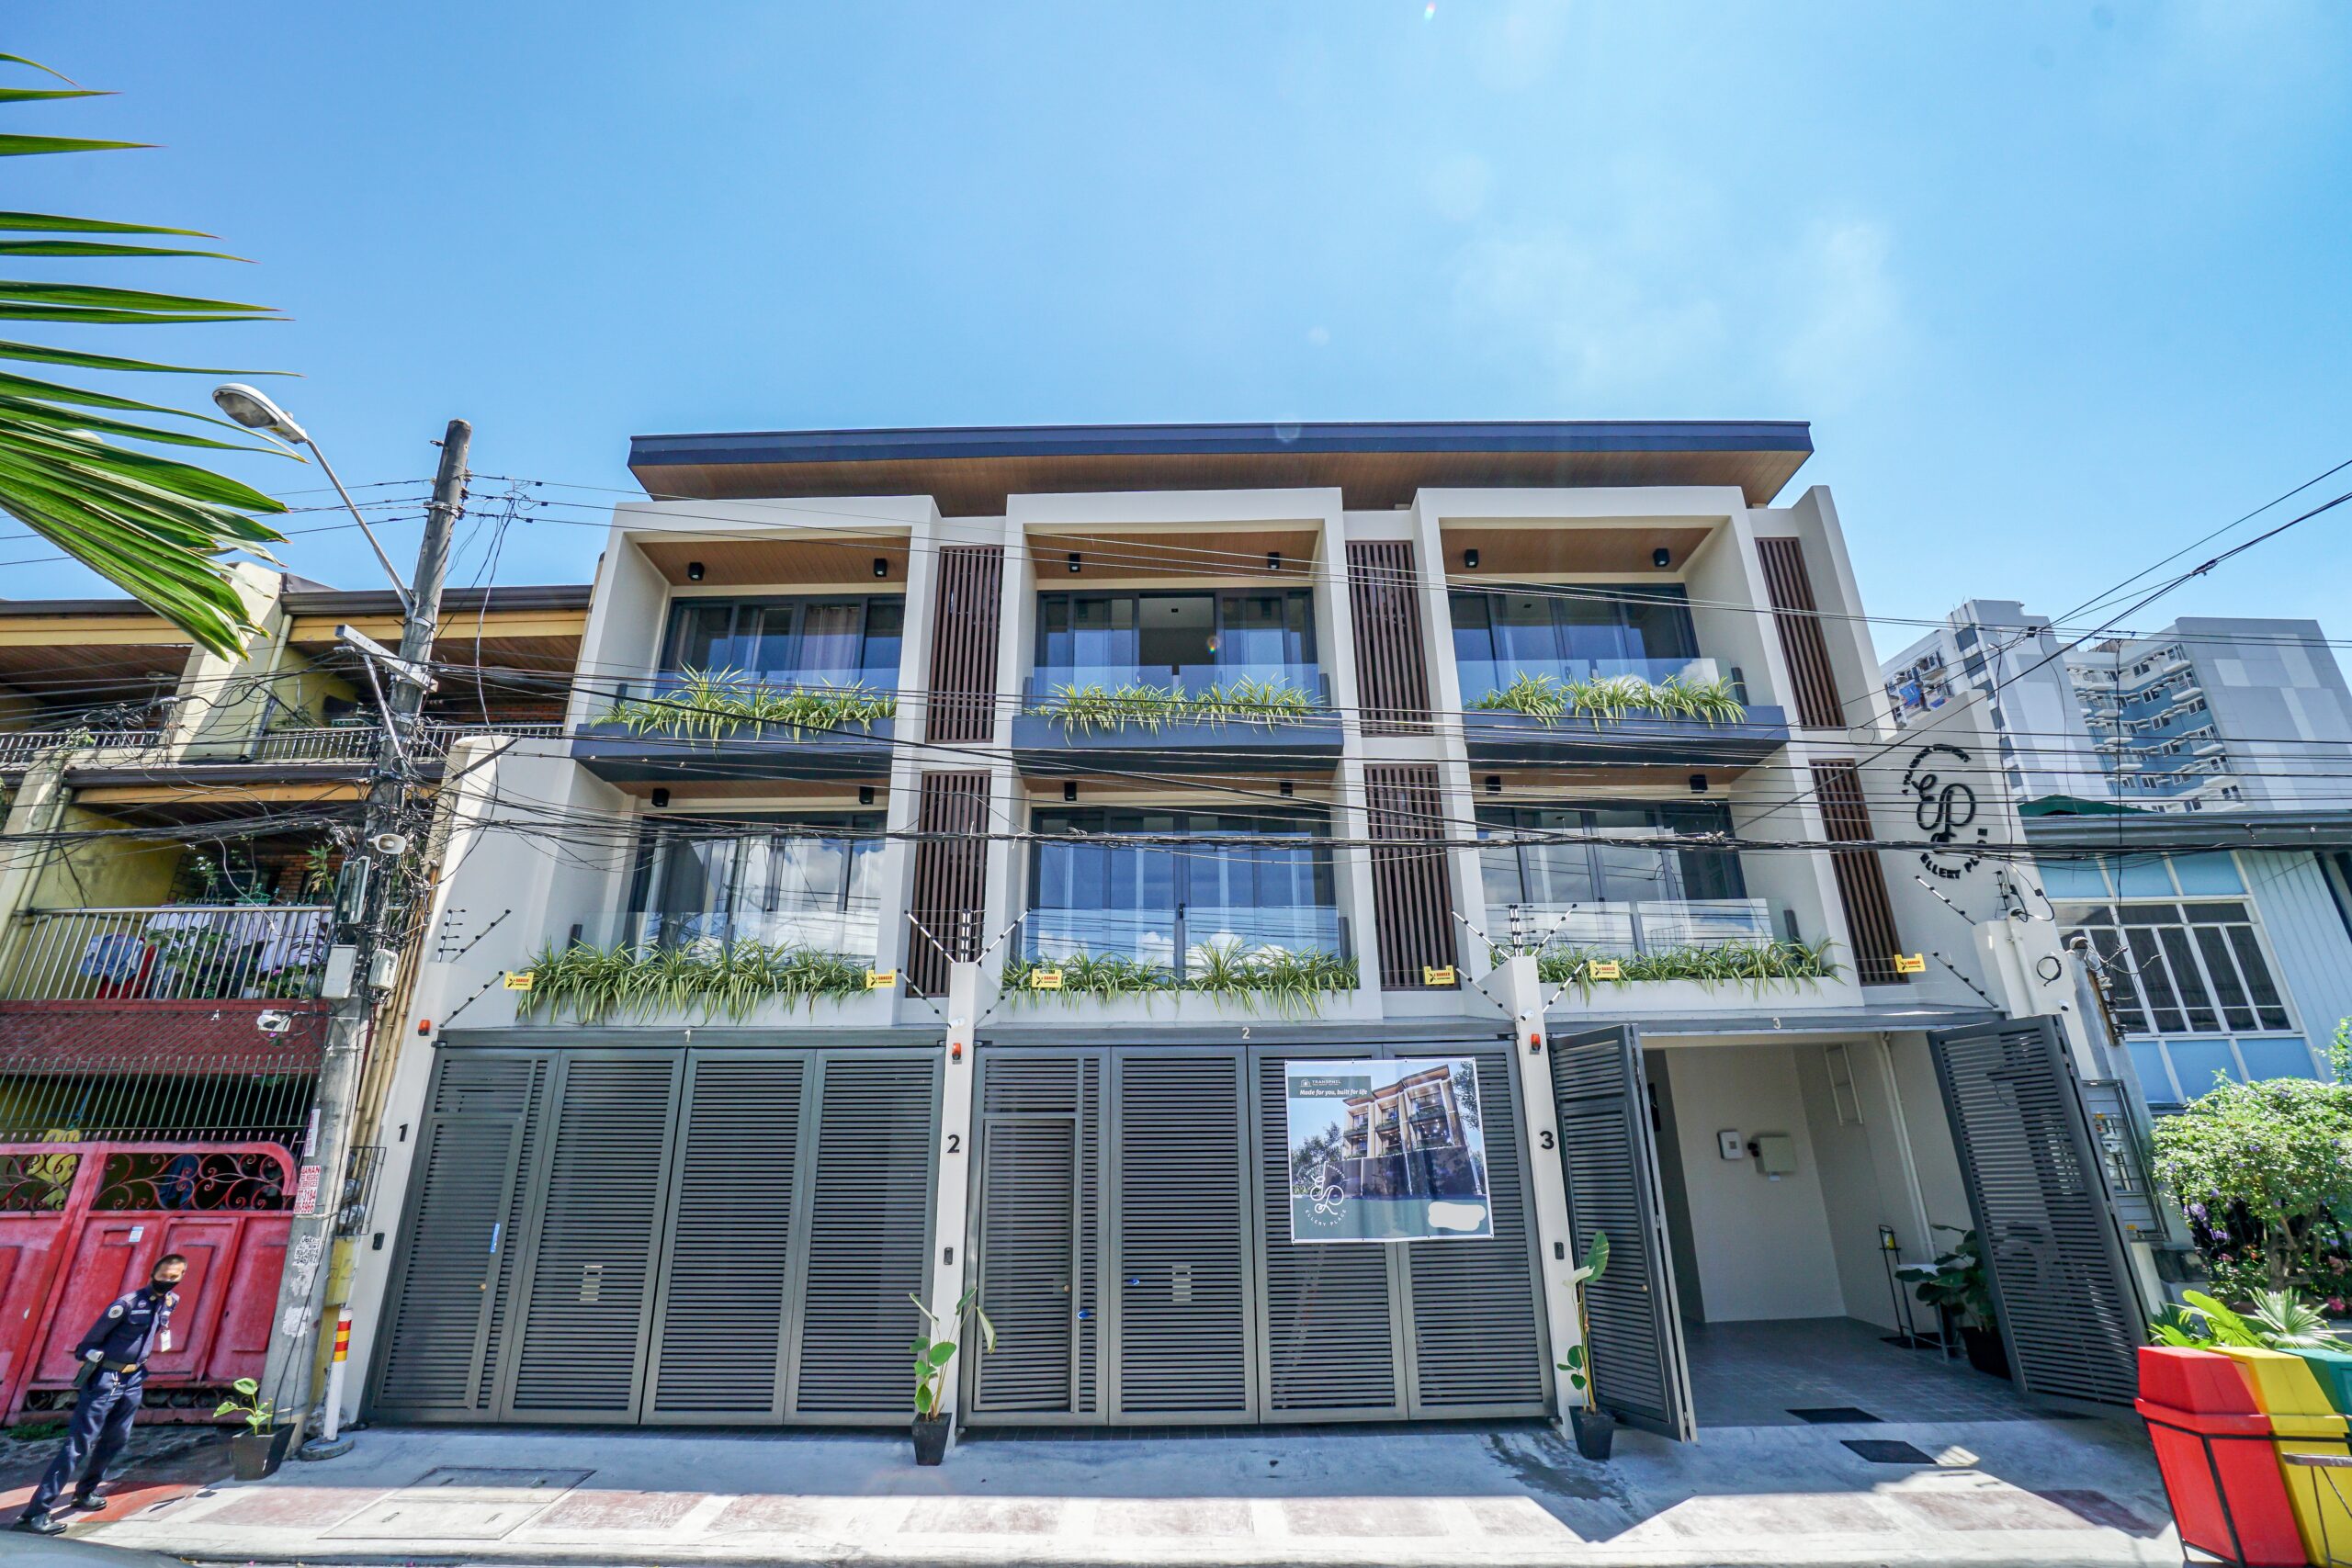 3-Story High-end Townhouse for Sale in East Kamias, Quezon City